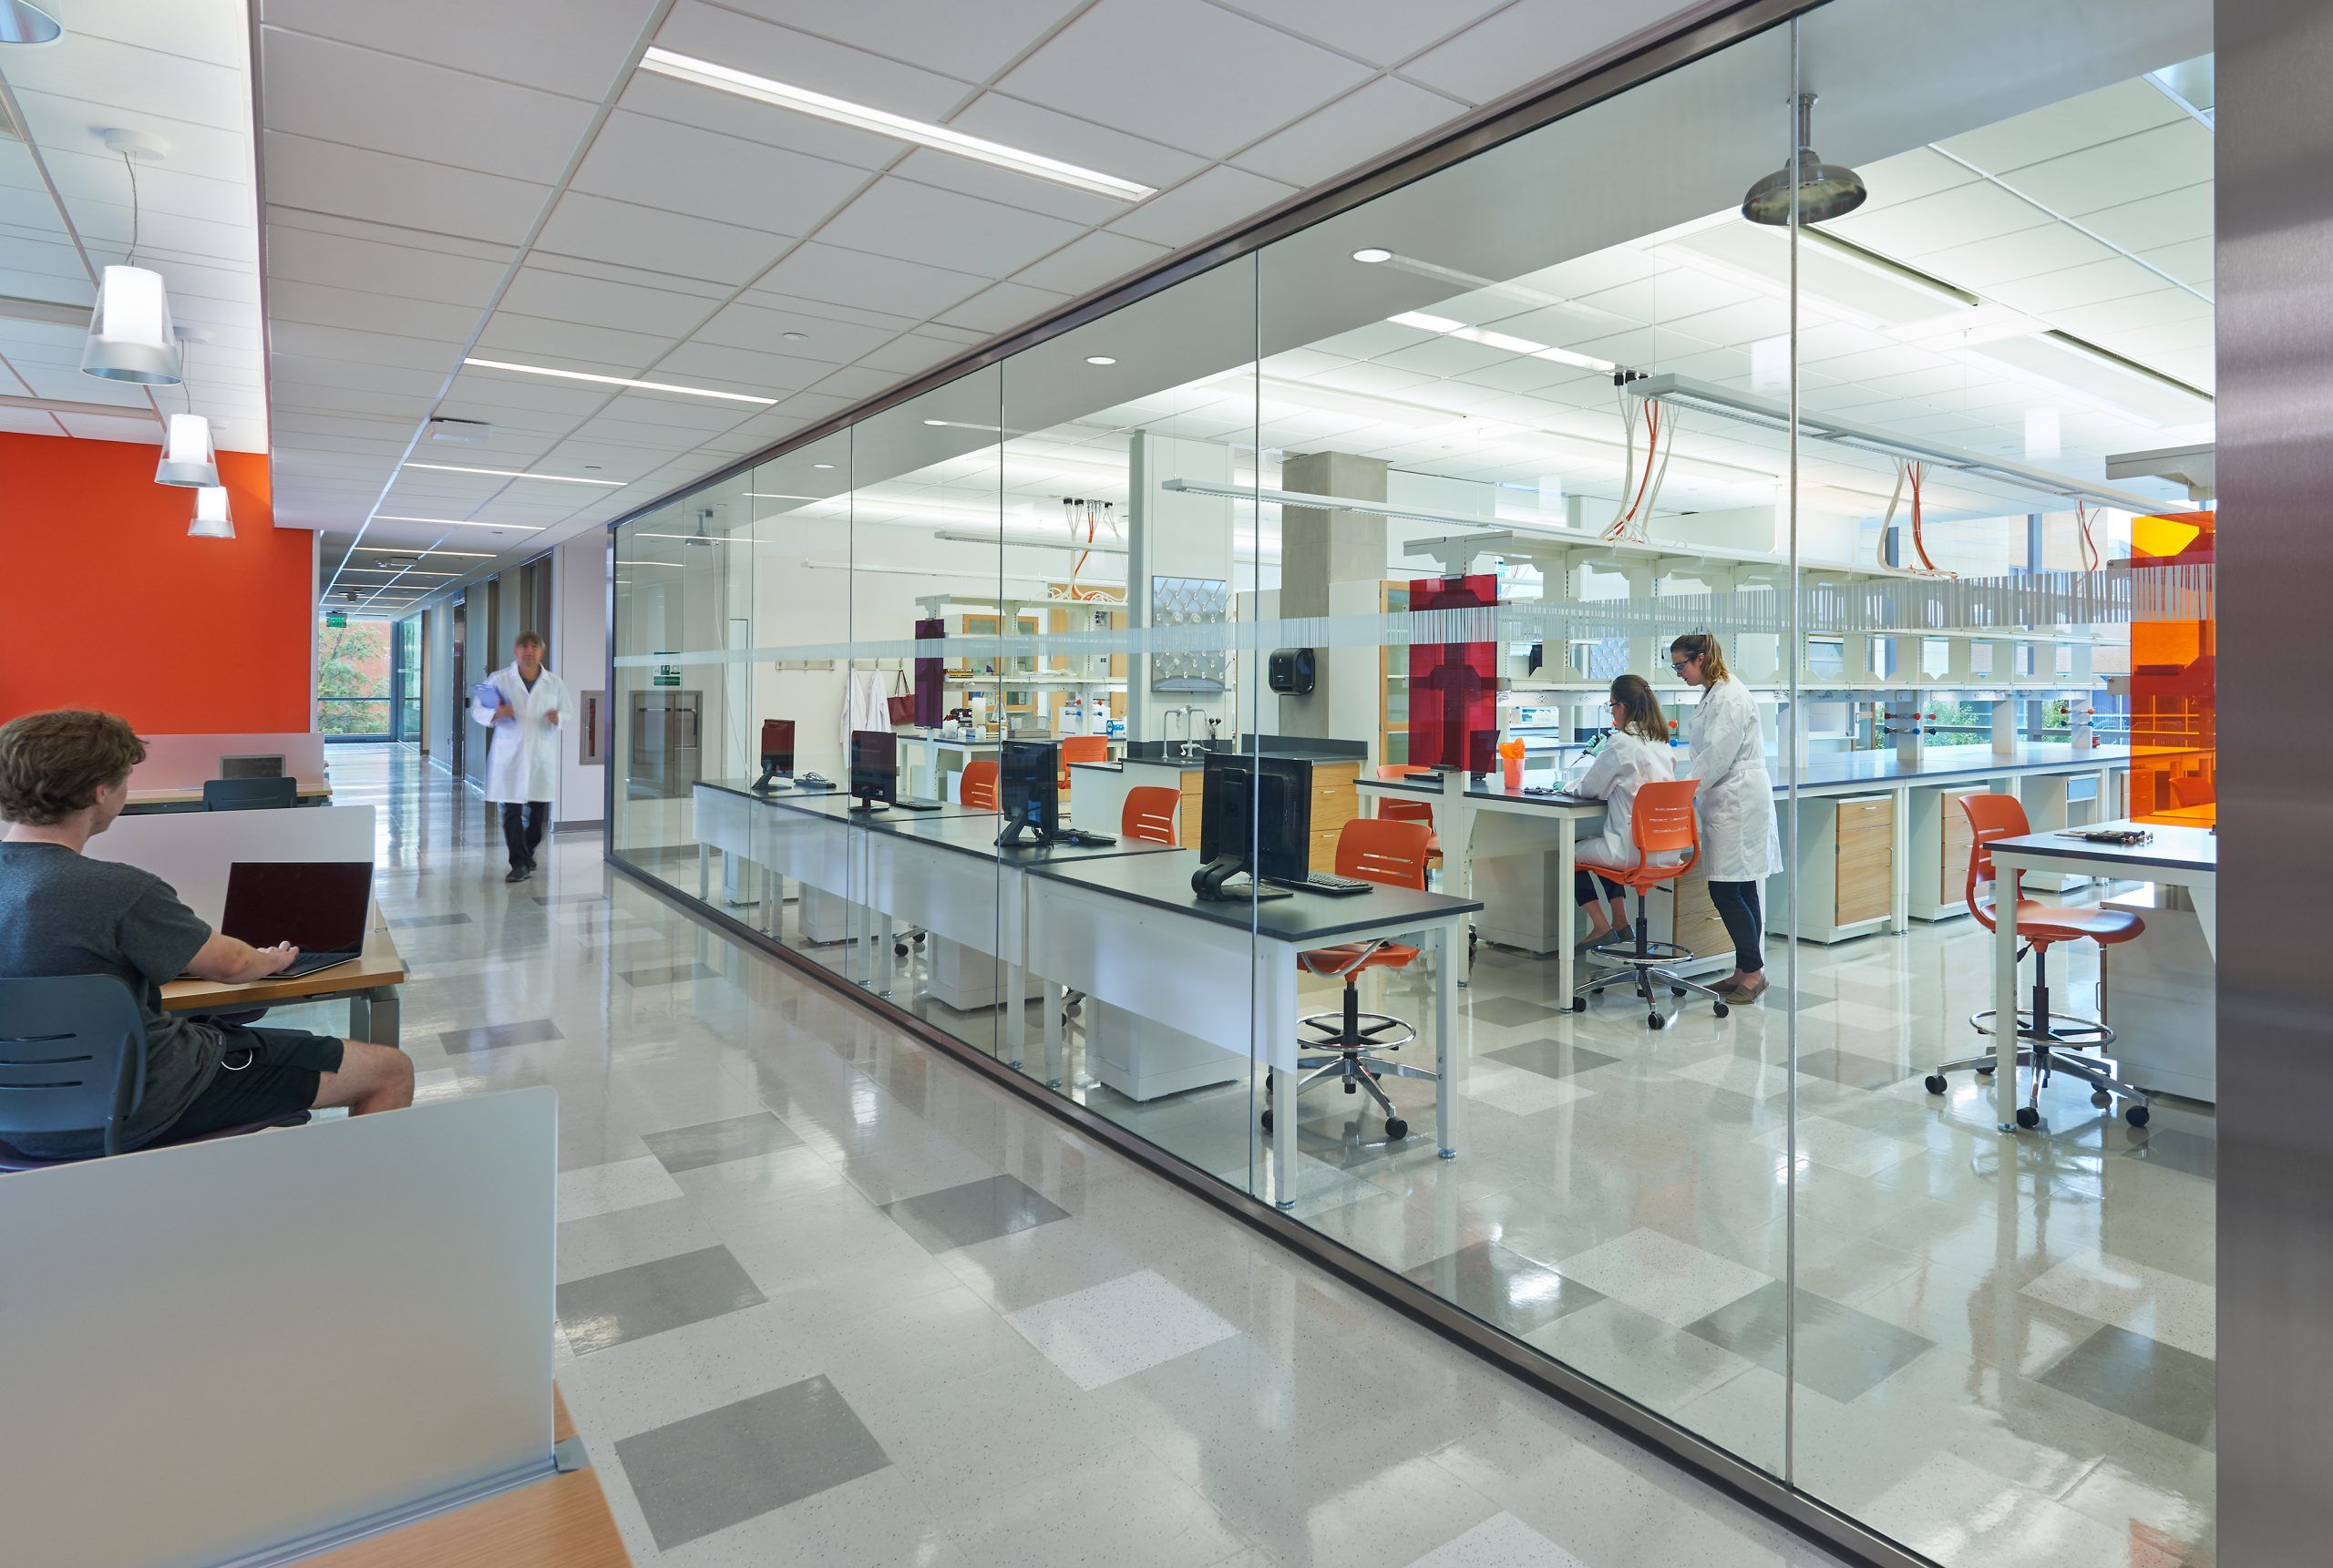 Researchers in a flexible wet lab design with glass walls separating them from students studying in a common area